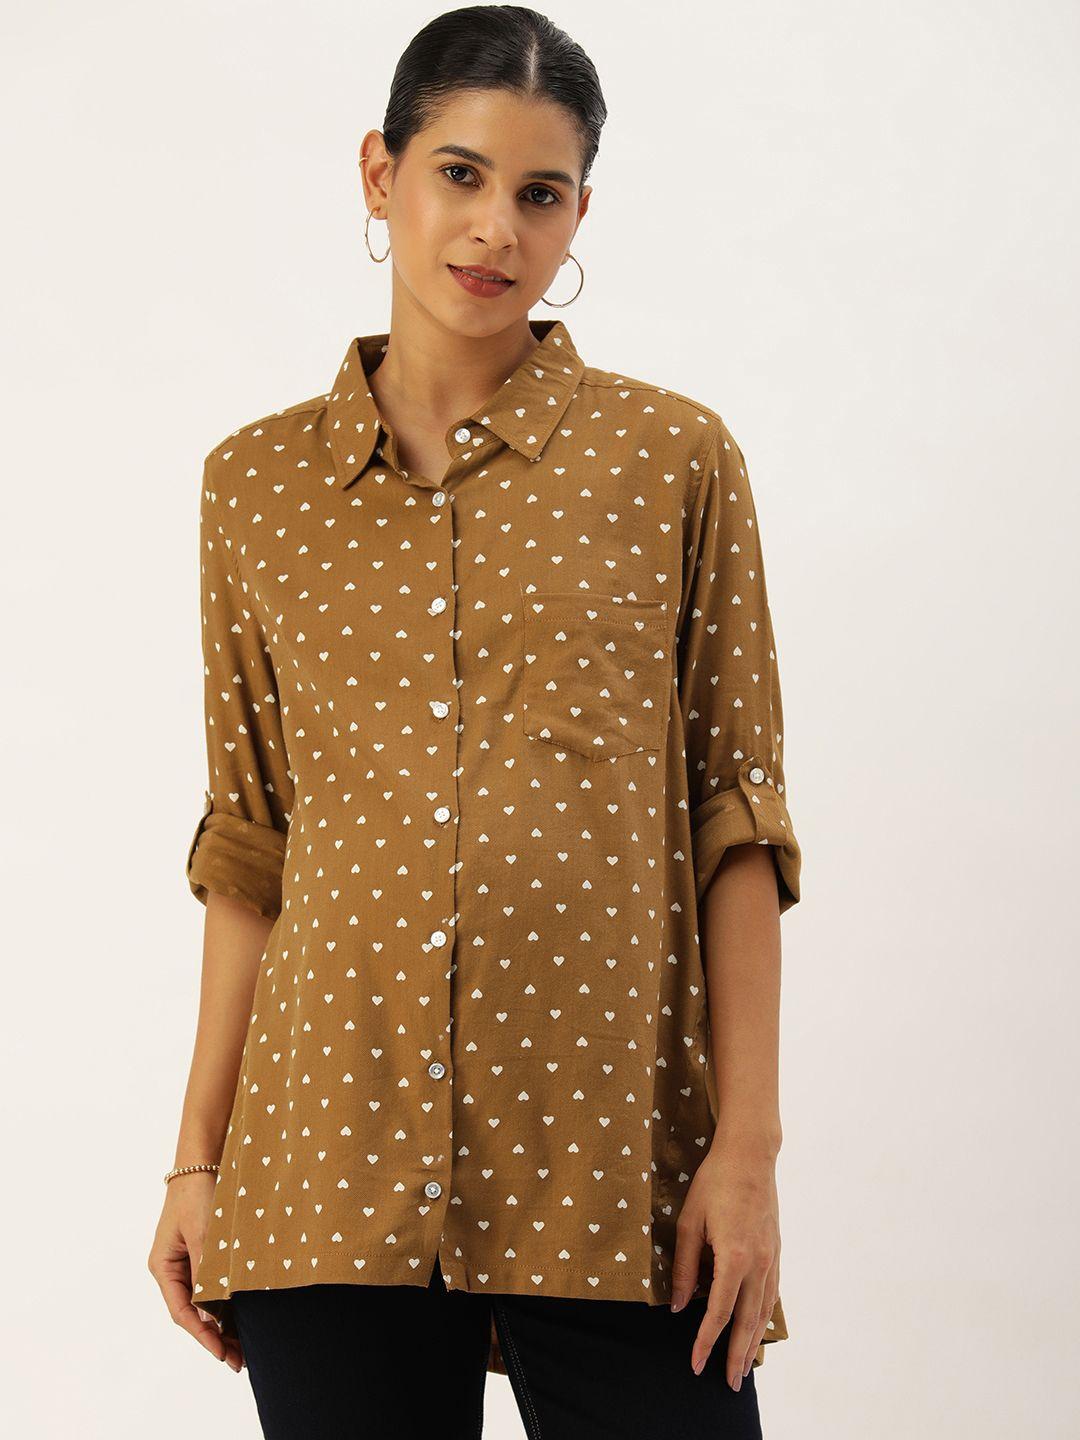 blush 9 maternity women relaxed opaque printed maternity shirt